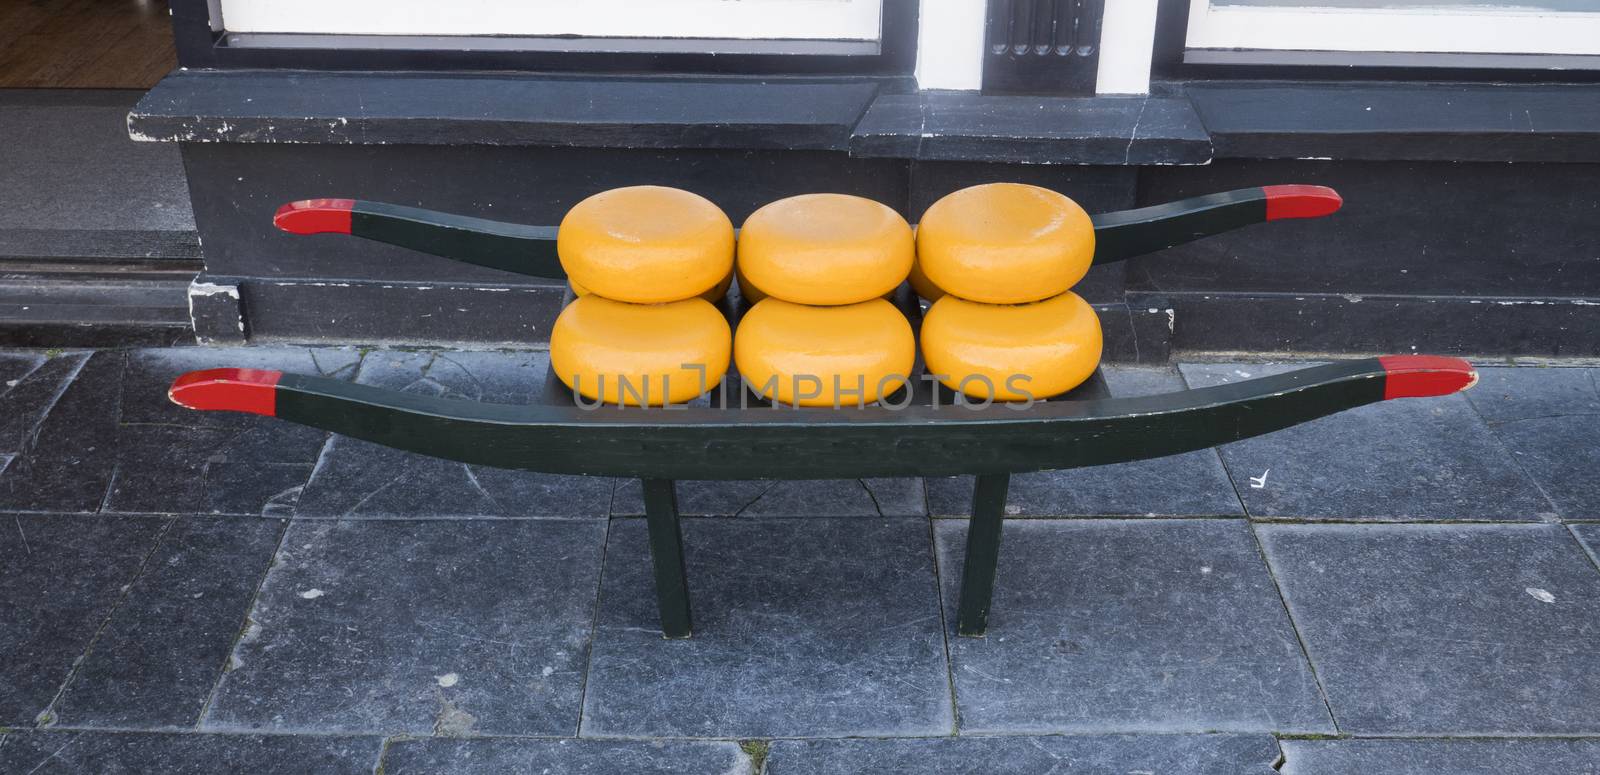 some whoole dutch cheese at the city of Delft by compuinfoto